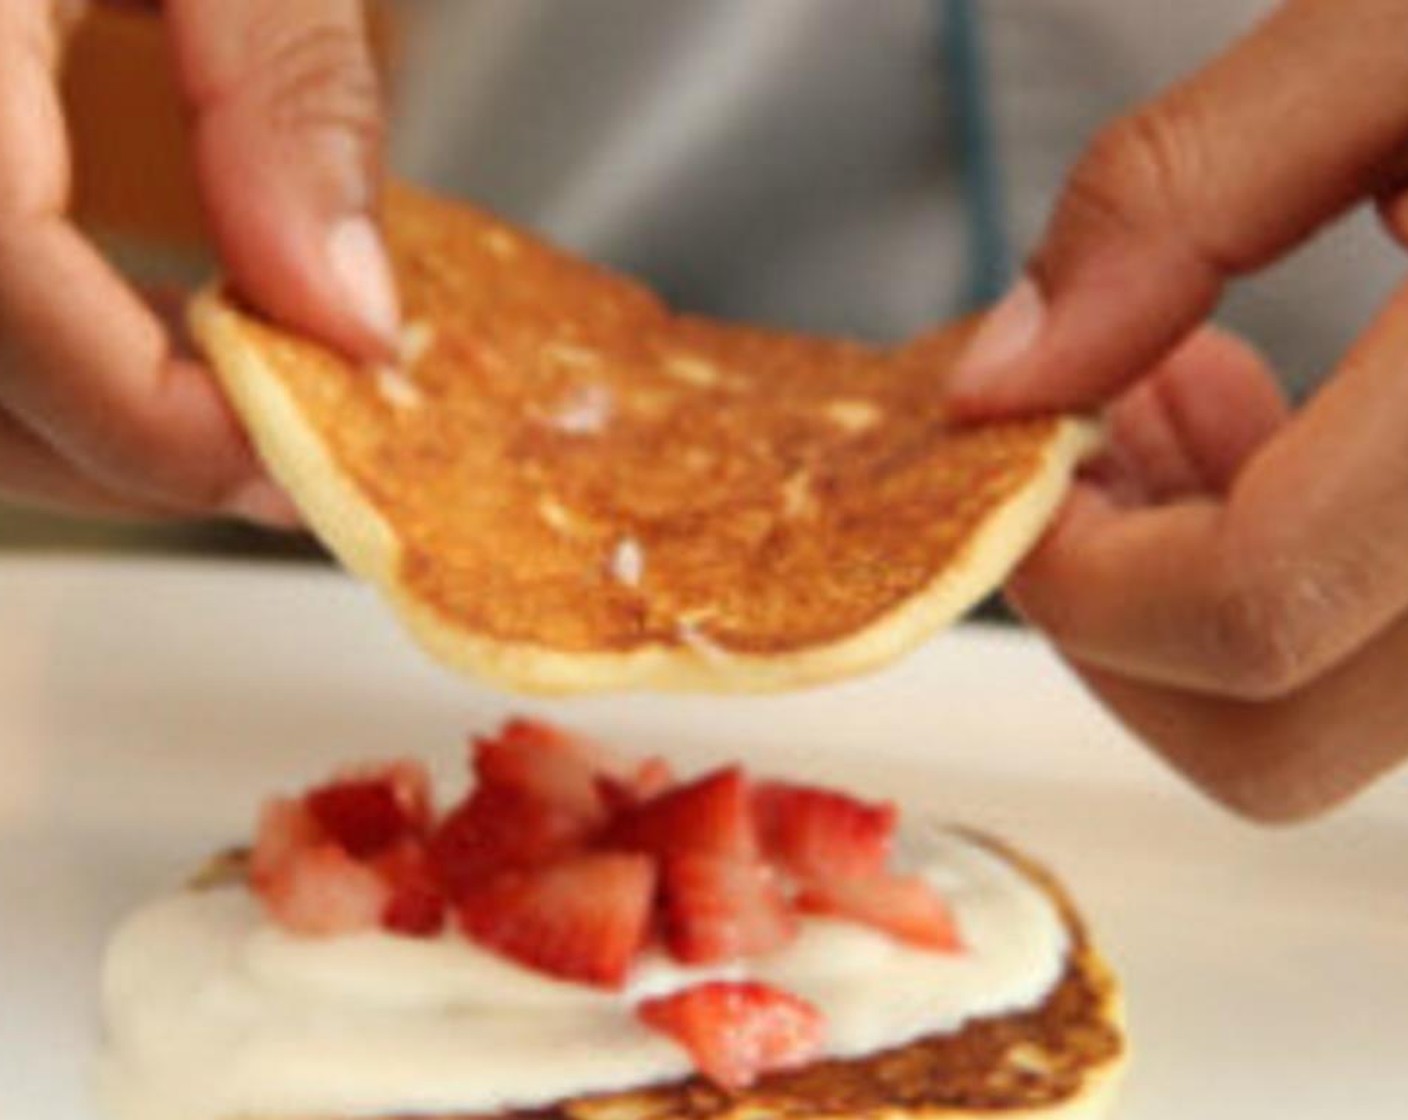 step 8 Assemble your three-layer strawberry pancakes. Place the pancake on a plate, add whipped cream and then strawberries, and repeat until you have three layers of everything!